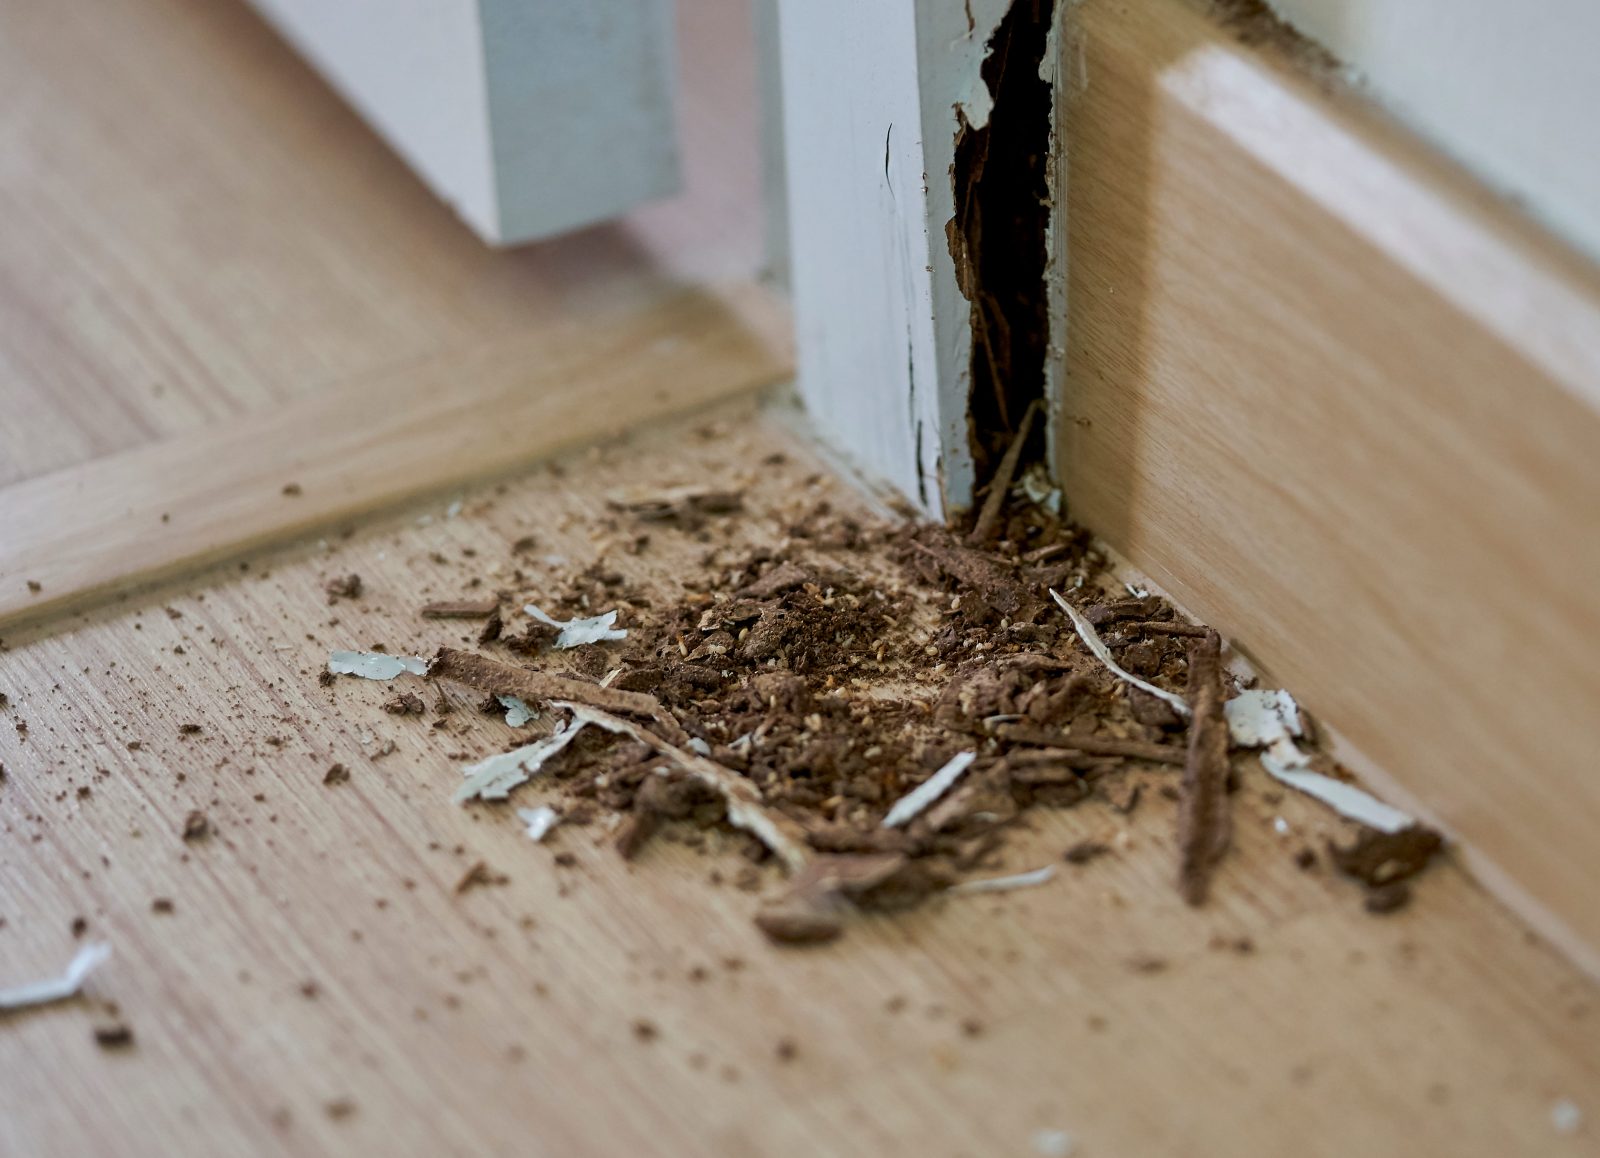 Common Household Pests and How NatureTek’s Products Effectively Combat Them